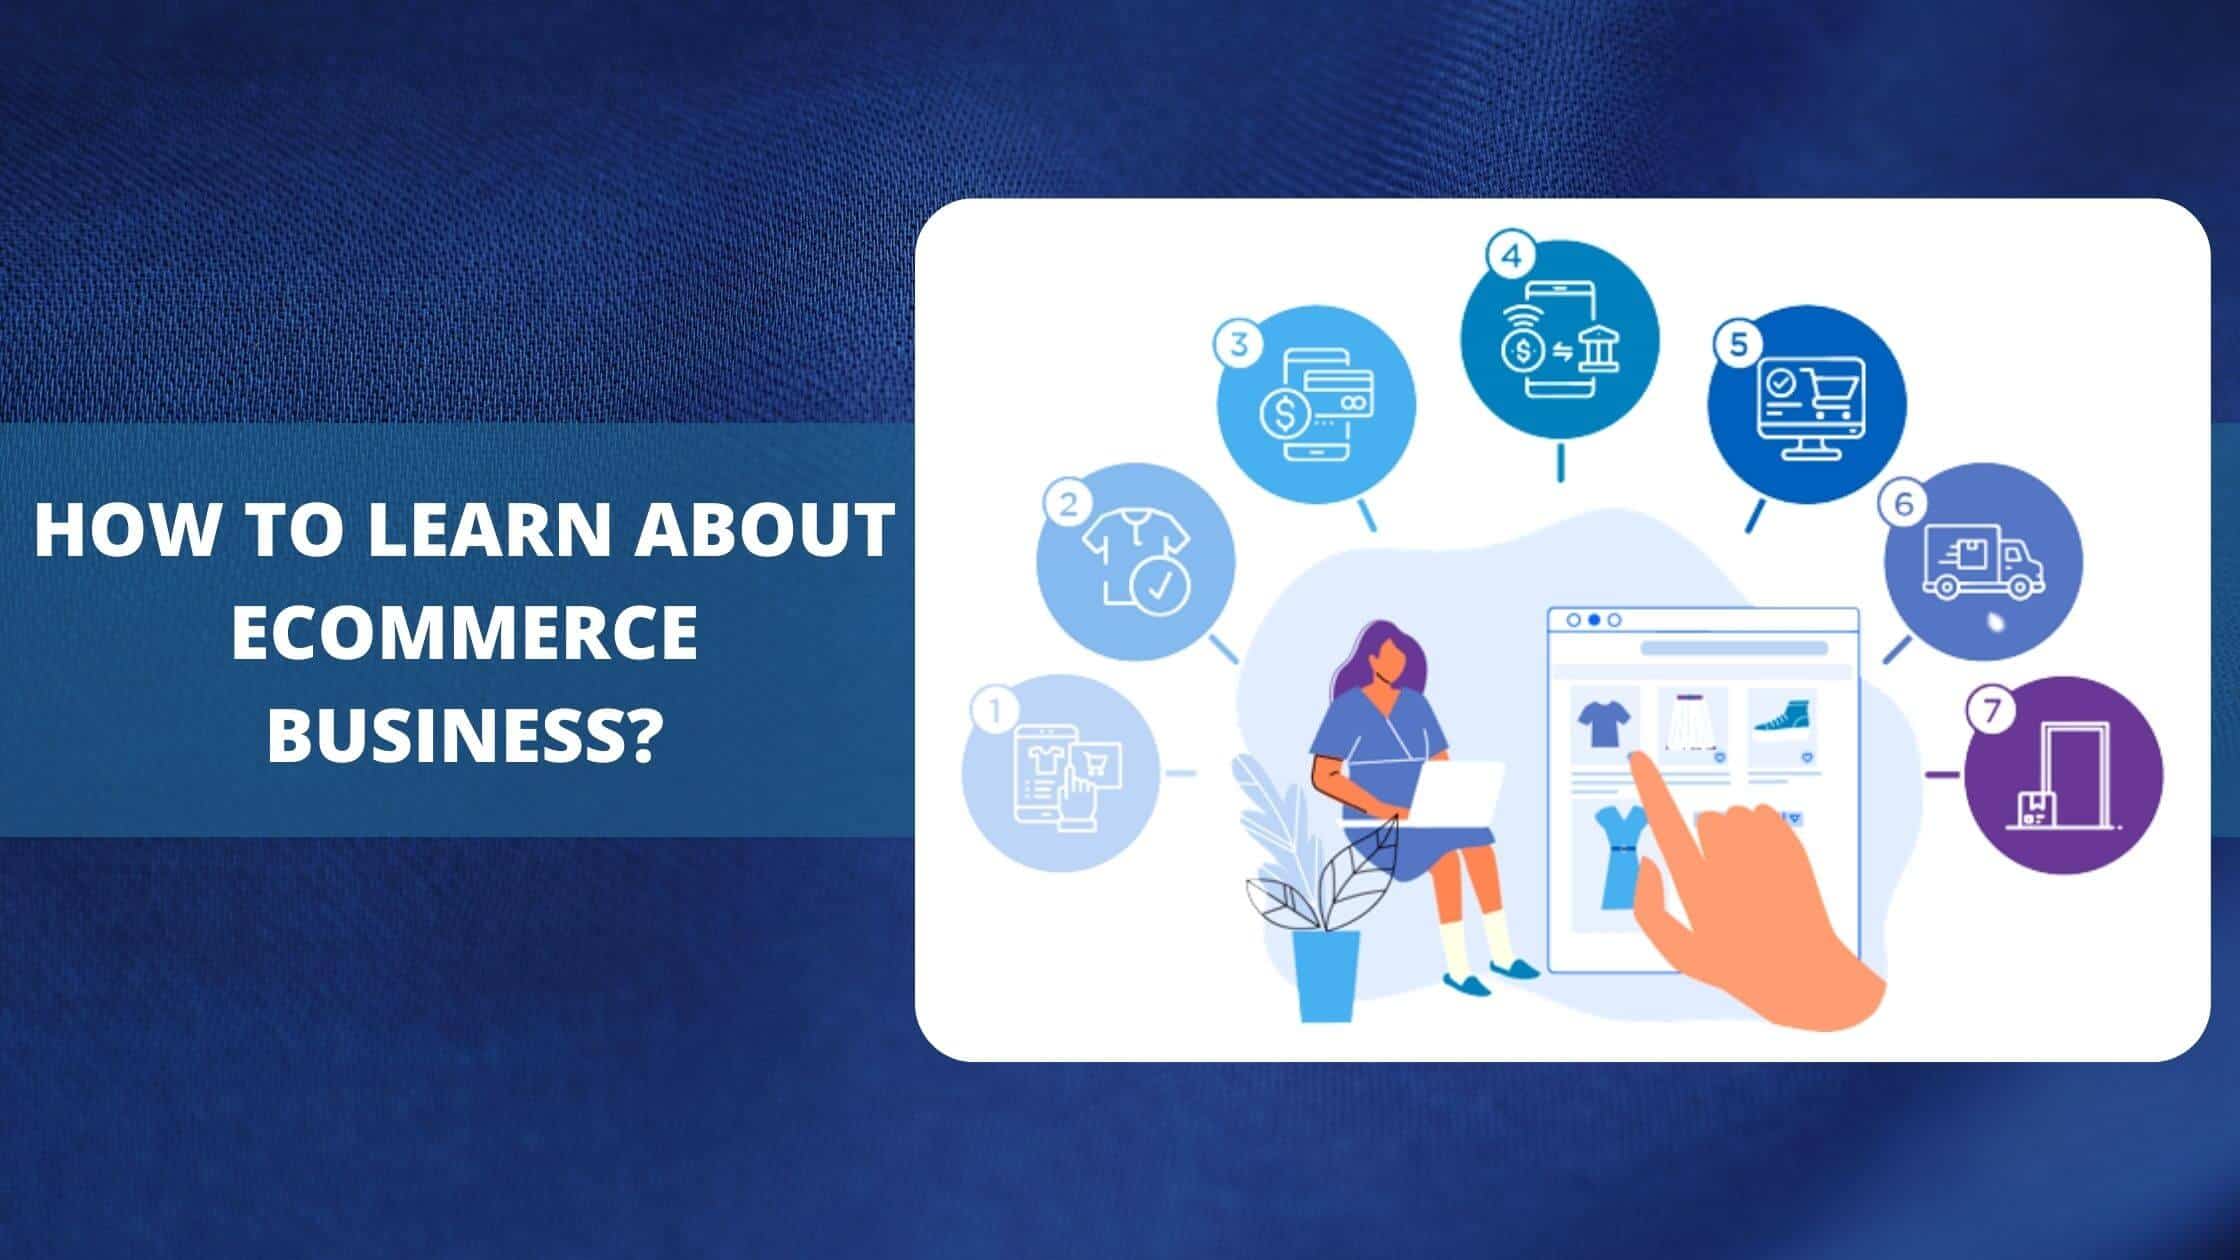 How To Learn About eCommerce Business